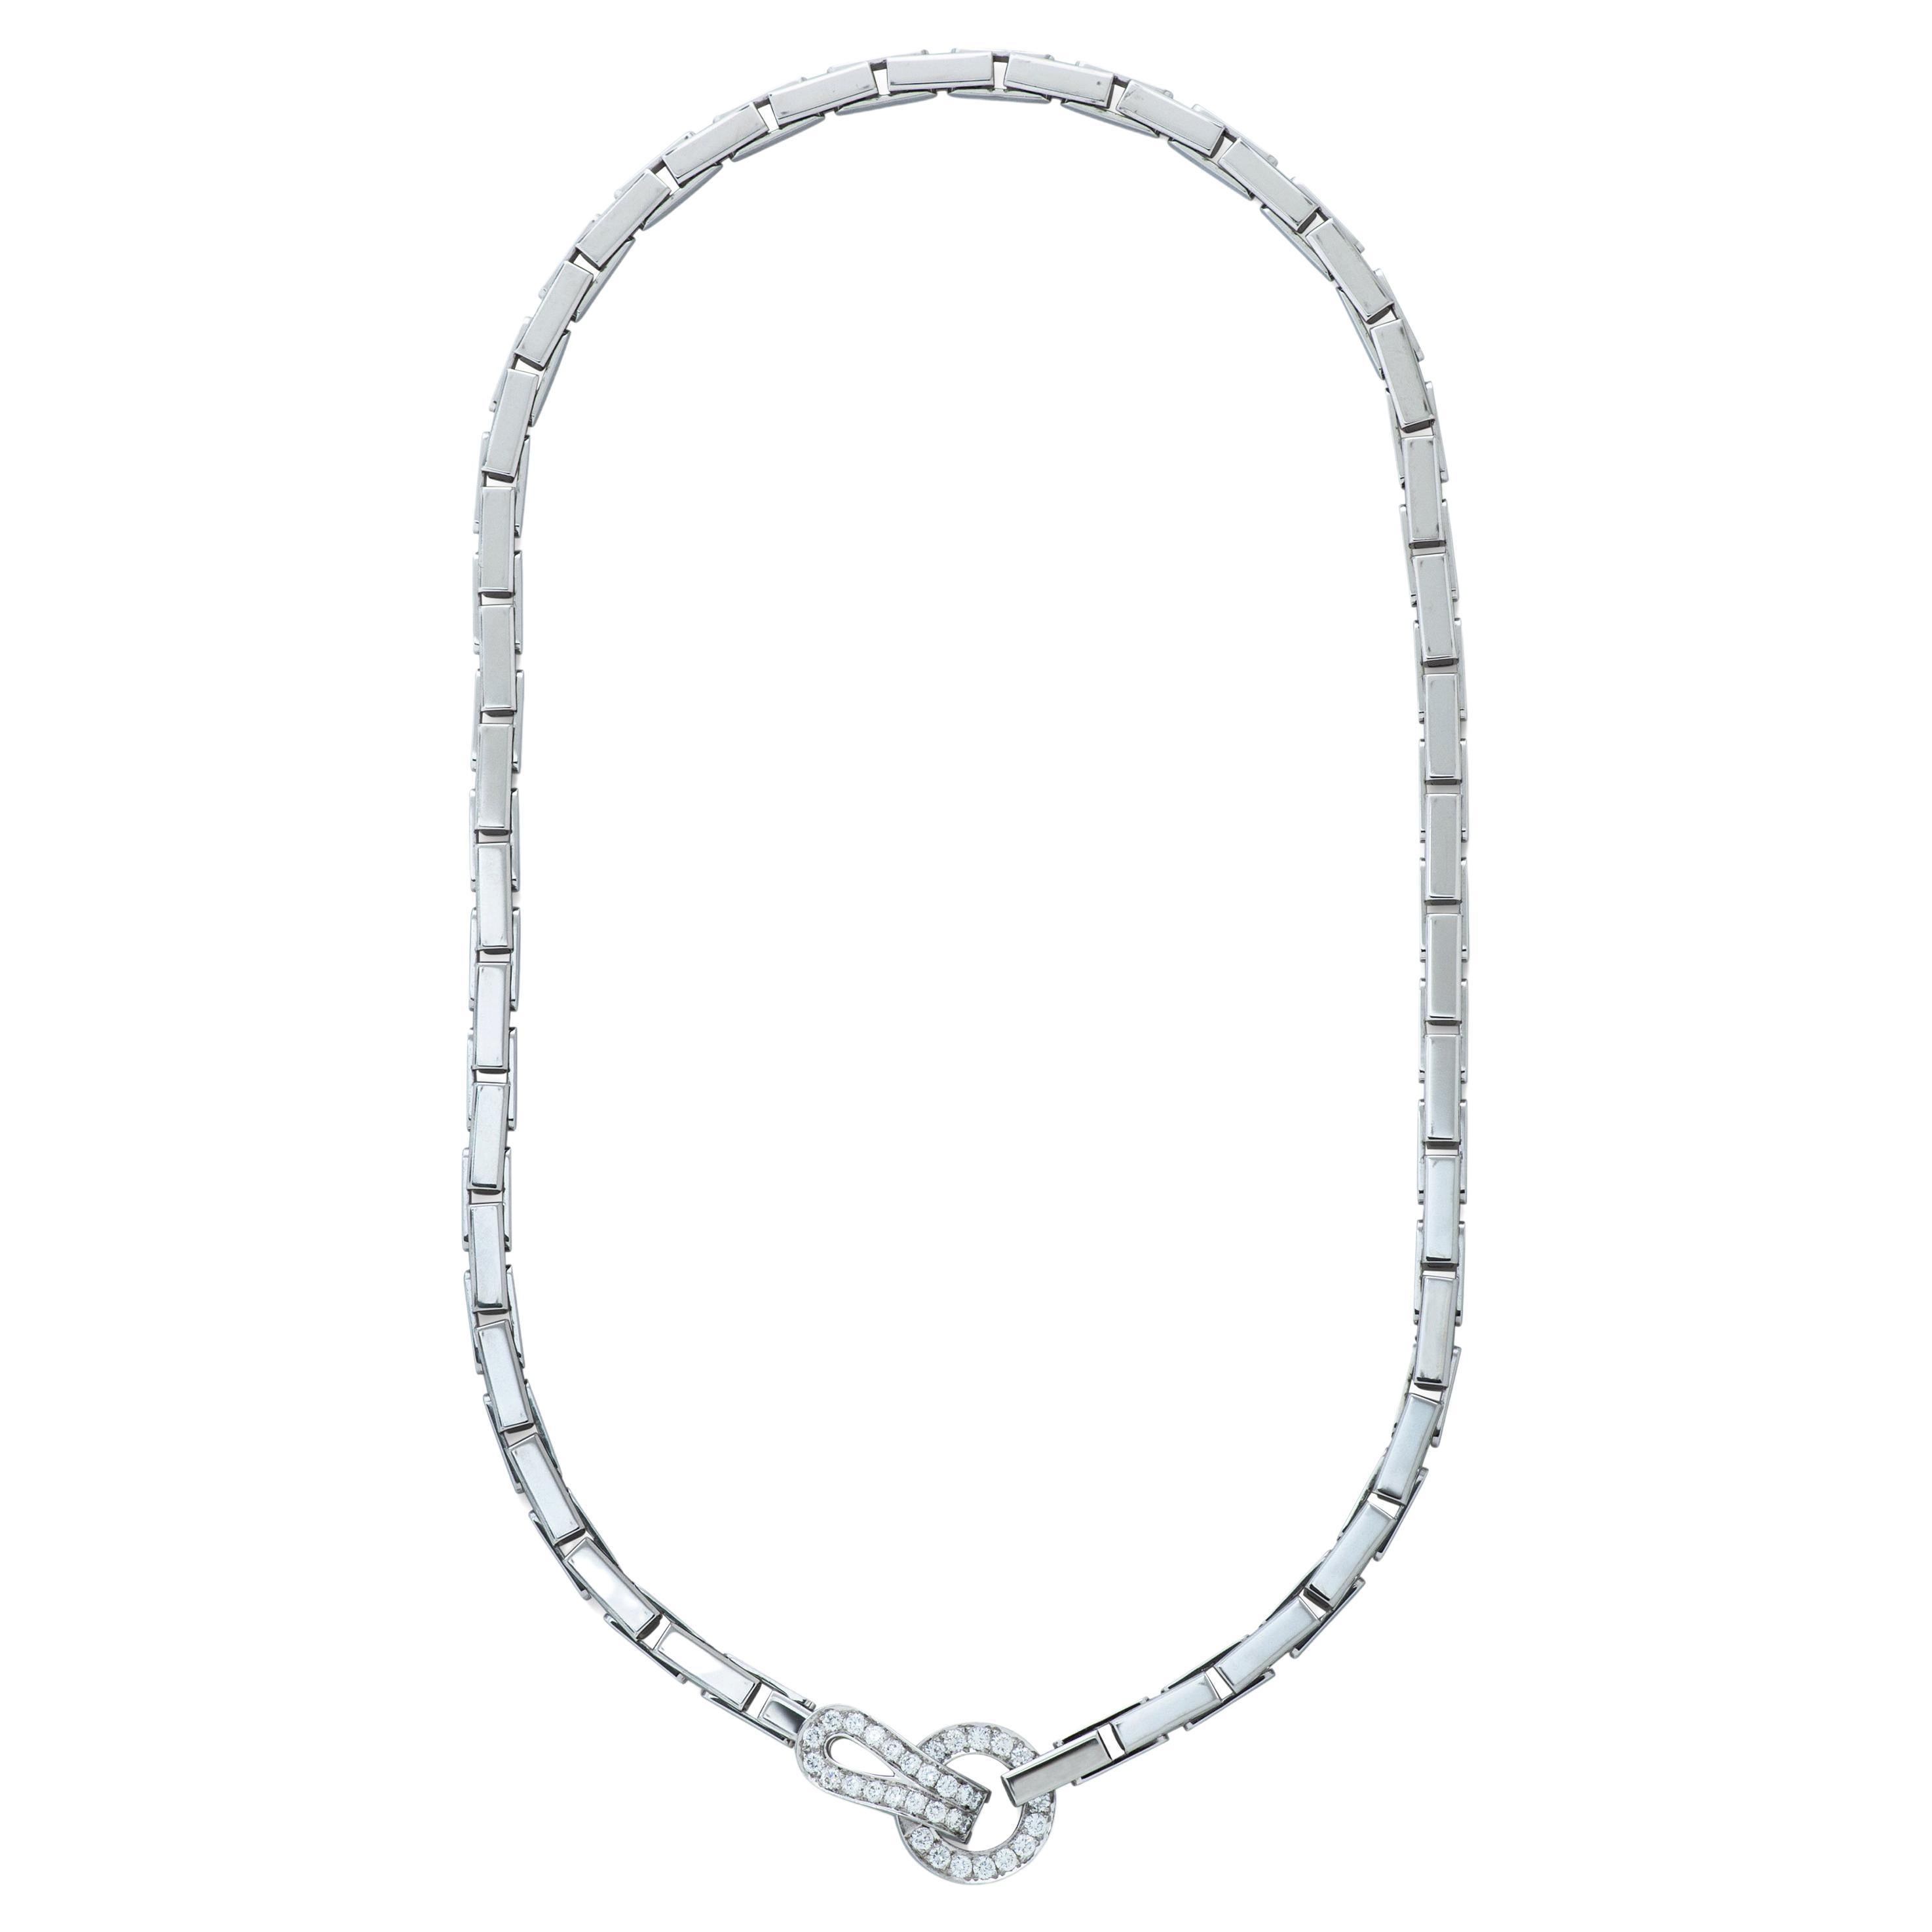 Cartier diamond link necklace in 18k white gold from the Agrafe collection, accompanied by Cartier certificate of authenticity. 

This necklace features 18k white gold brickwork links connected by a a hook and eye closure pave set with approximately